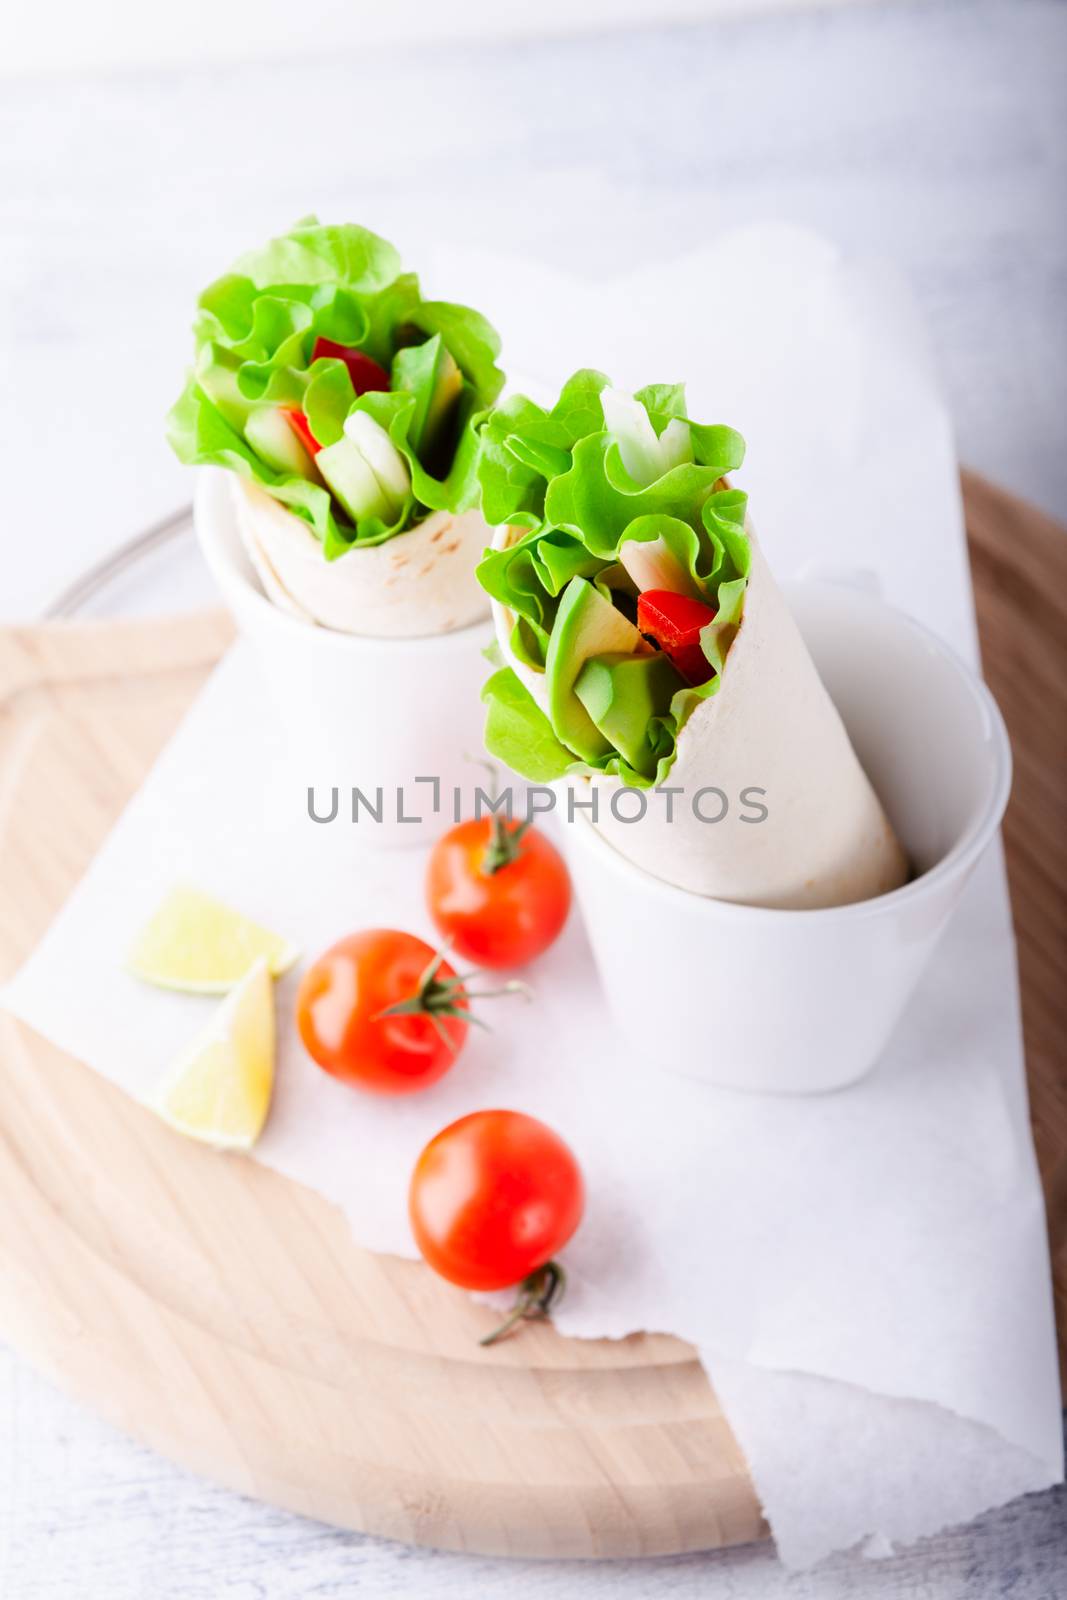 Vegetable wrap sandwiches with greenery and tomatoes